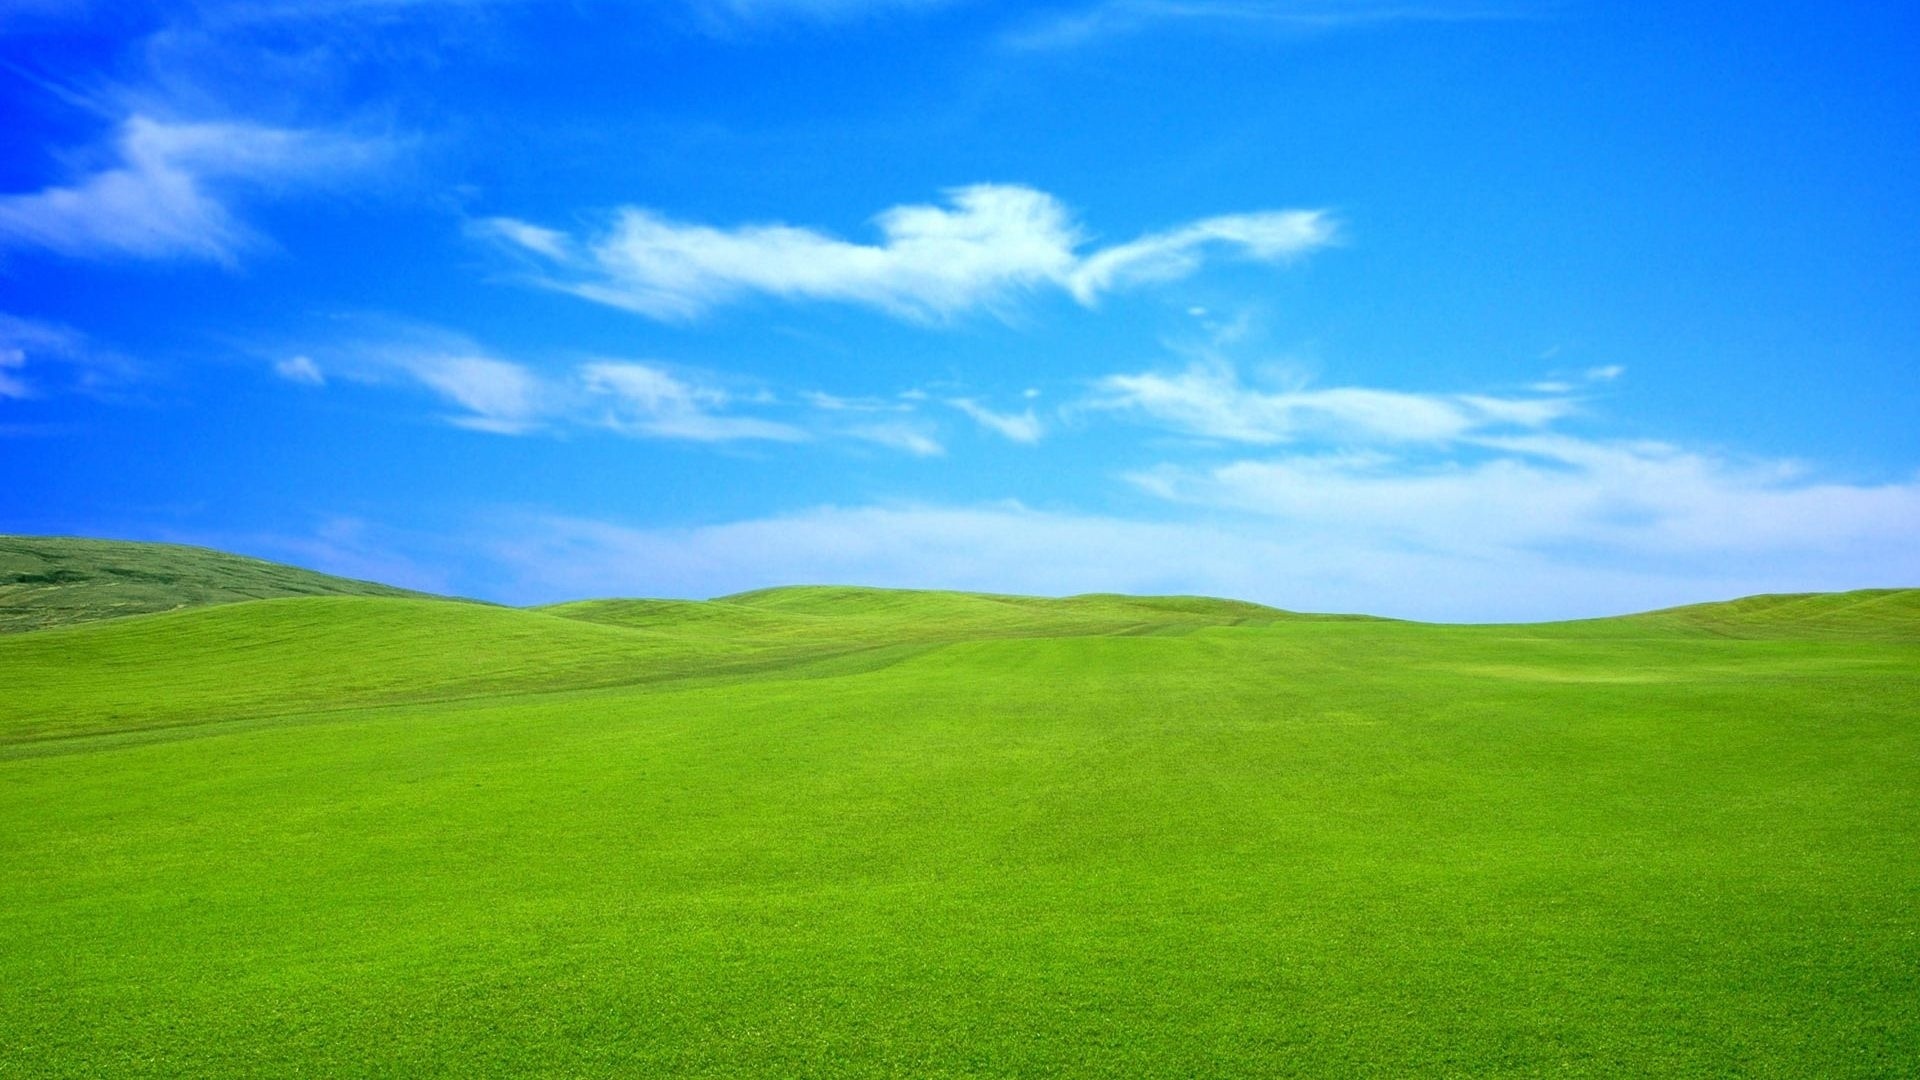 Sky And Grass wallpaper for computer